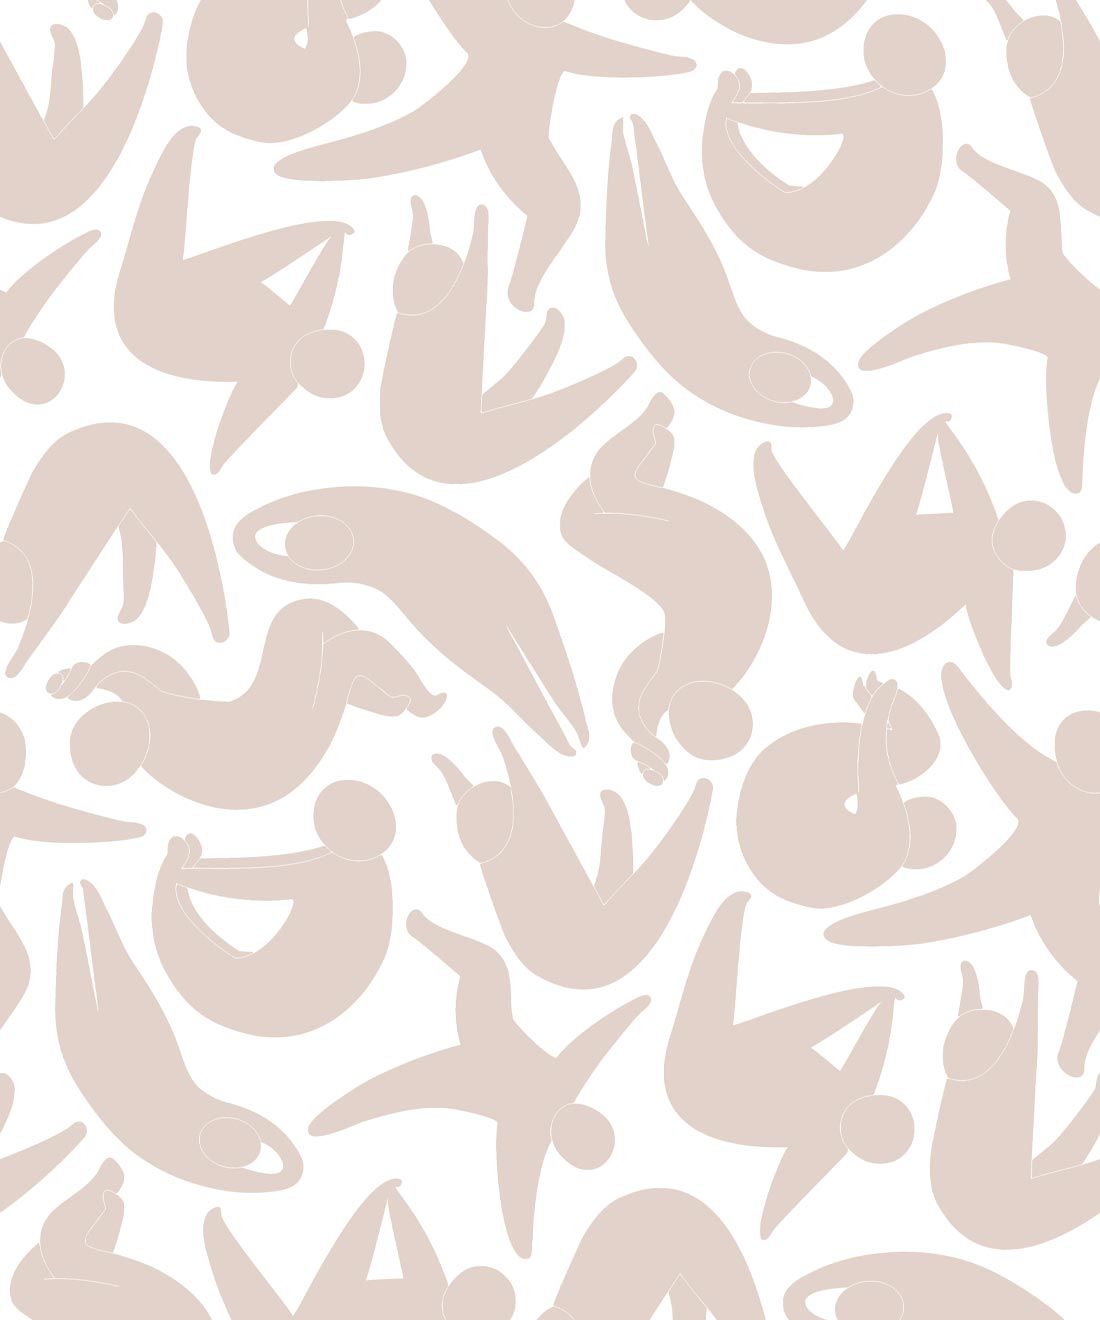 Down Face Dog Wallpaper • Soothing • Taupe • Swatch